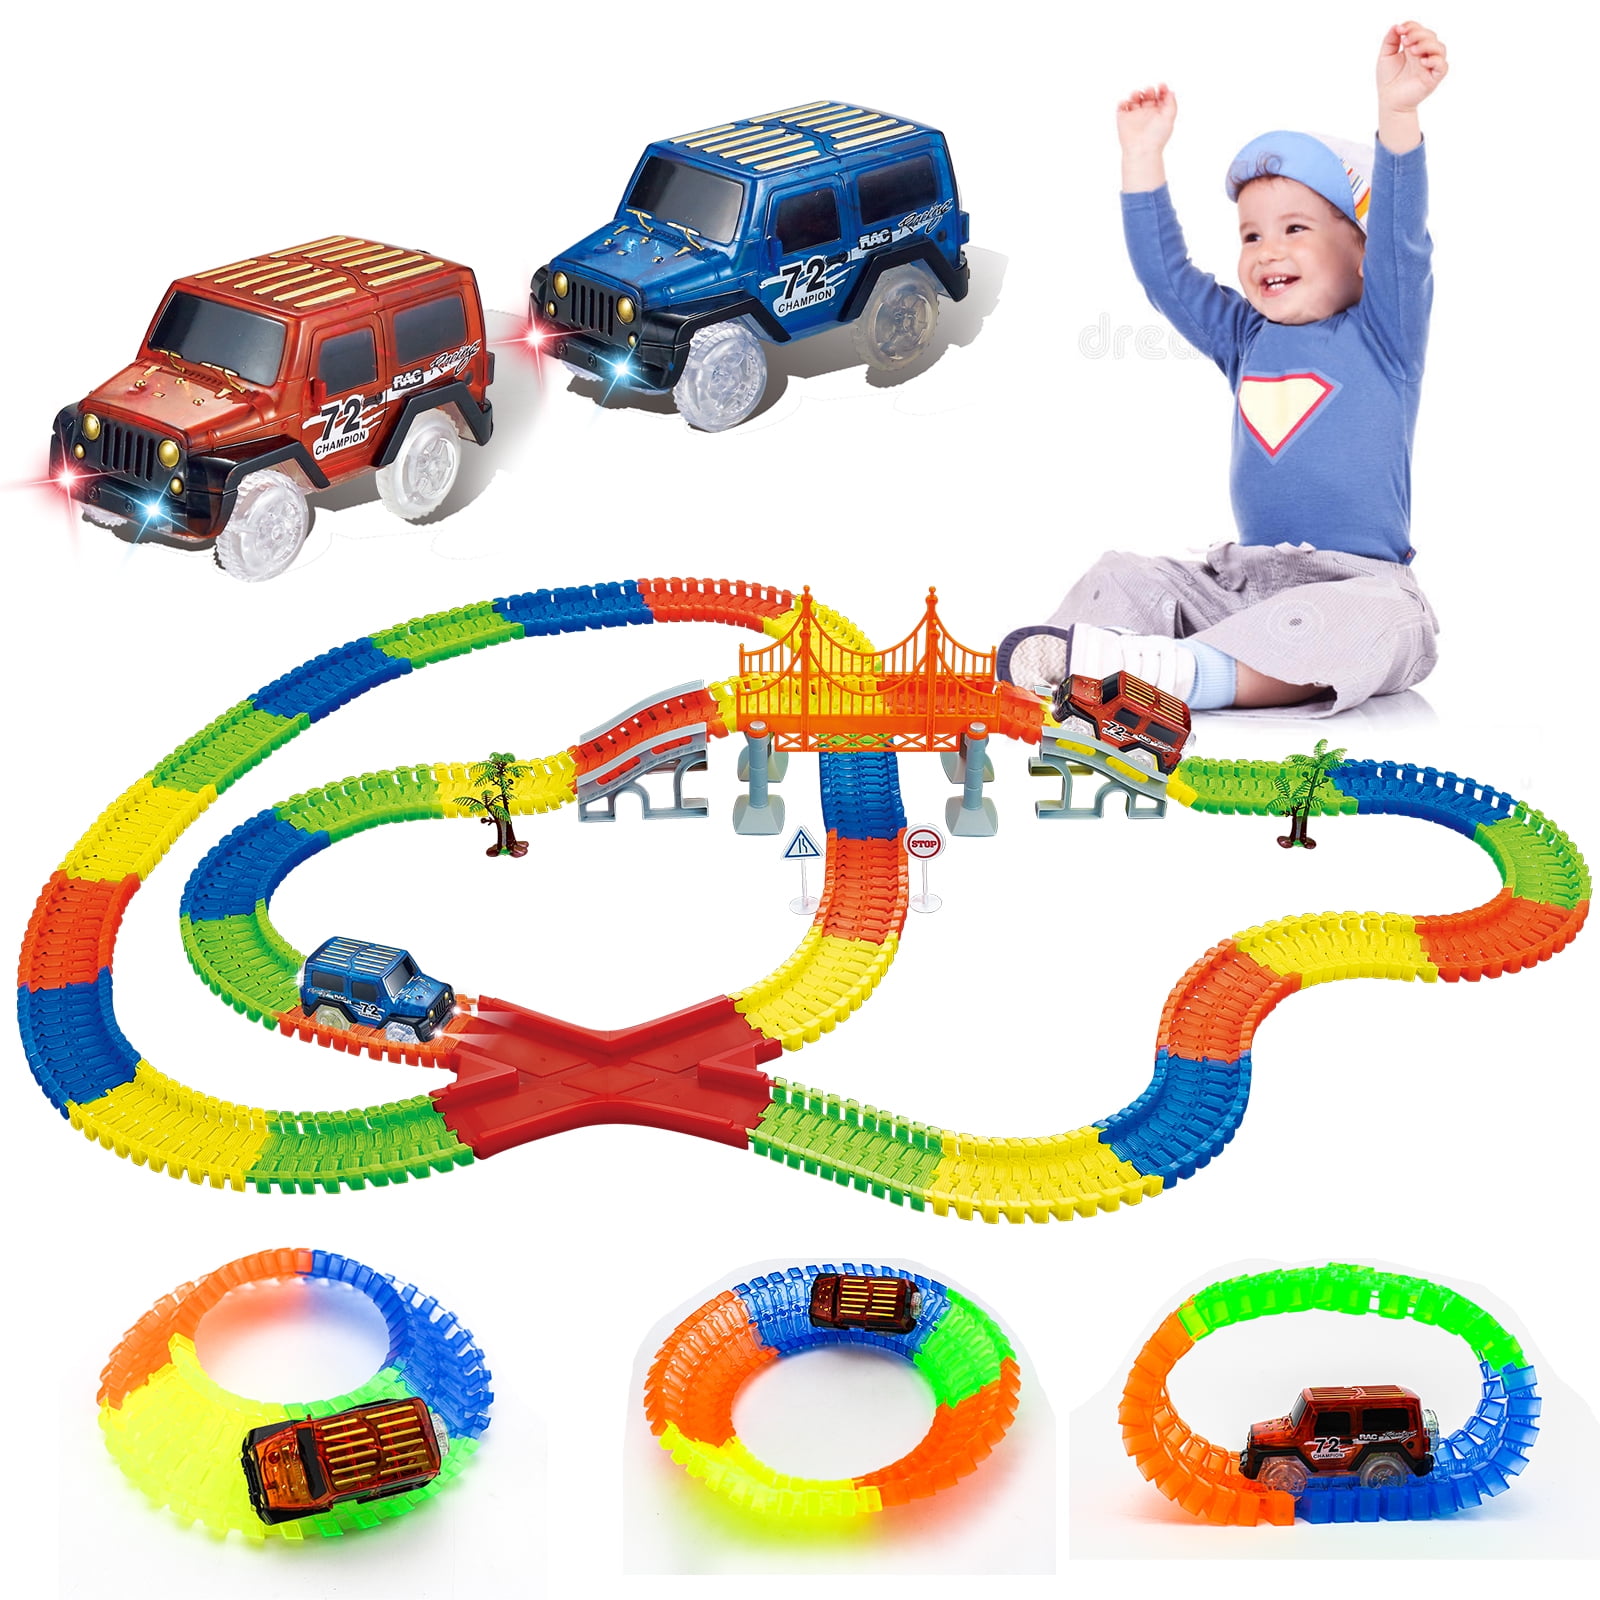 Hot Wheels Mario Kart Circuit Lite Track Set Ages 5 Toy Race Play Car Play Gift 